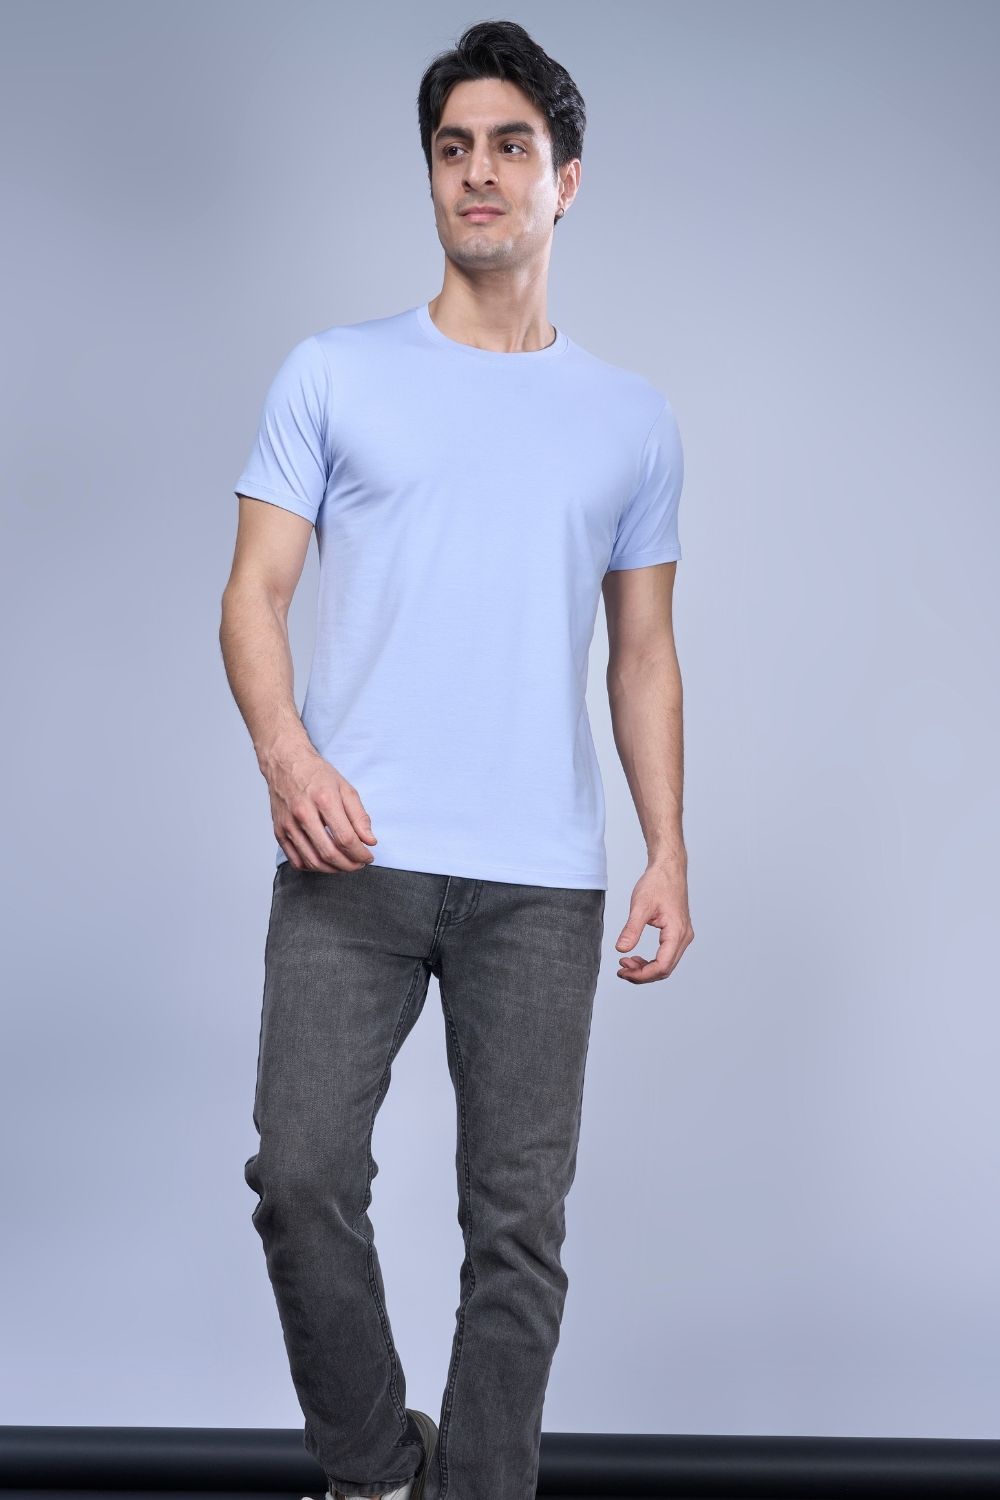 Cotton Stretch T shirt for men in the the solid color Powder Blue with half sleeves and round neck, front view.